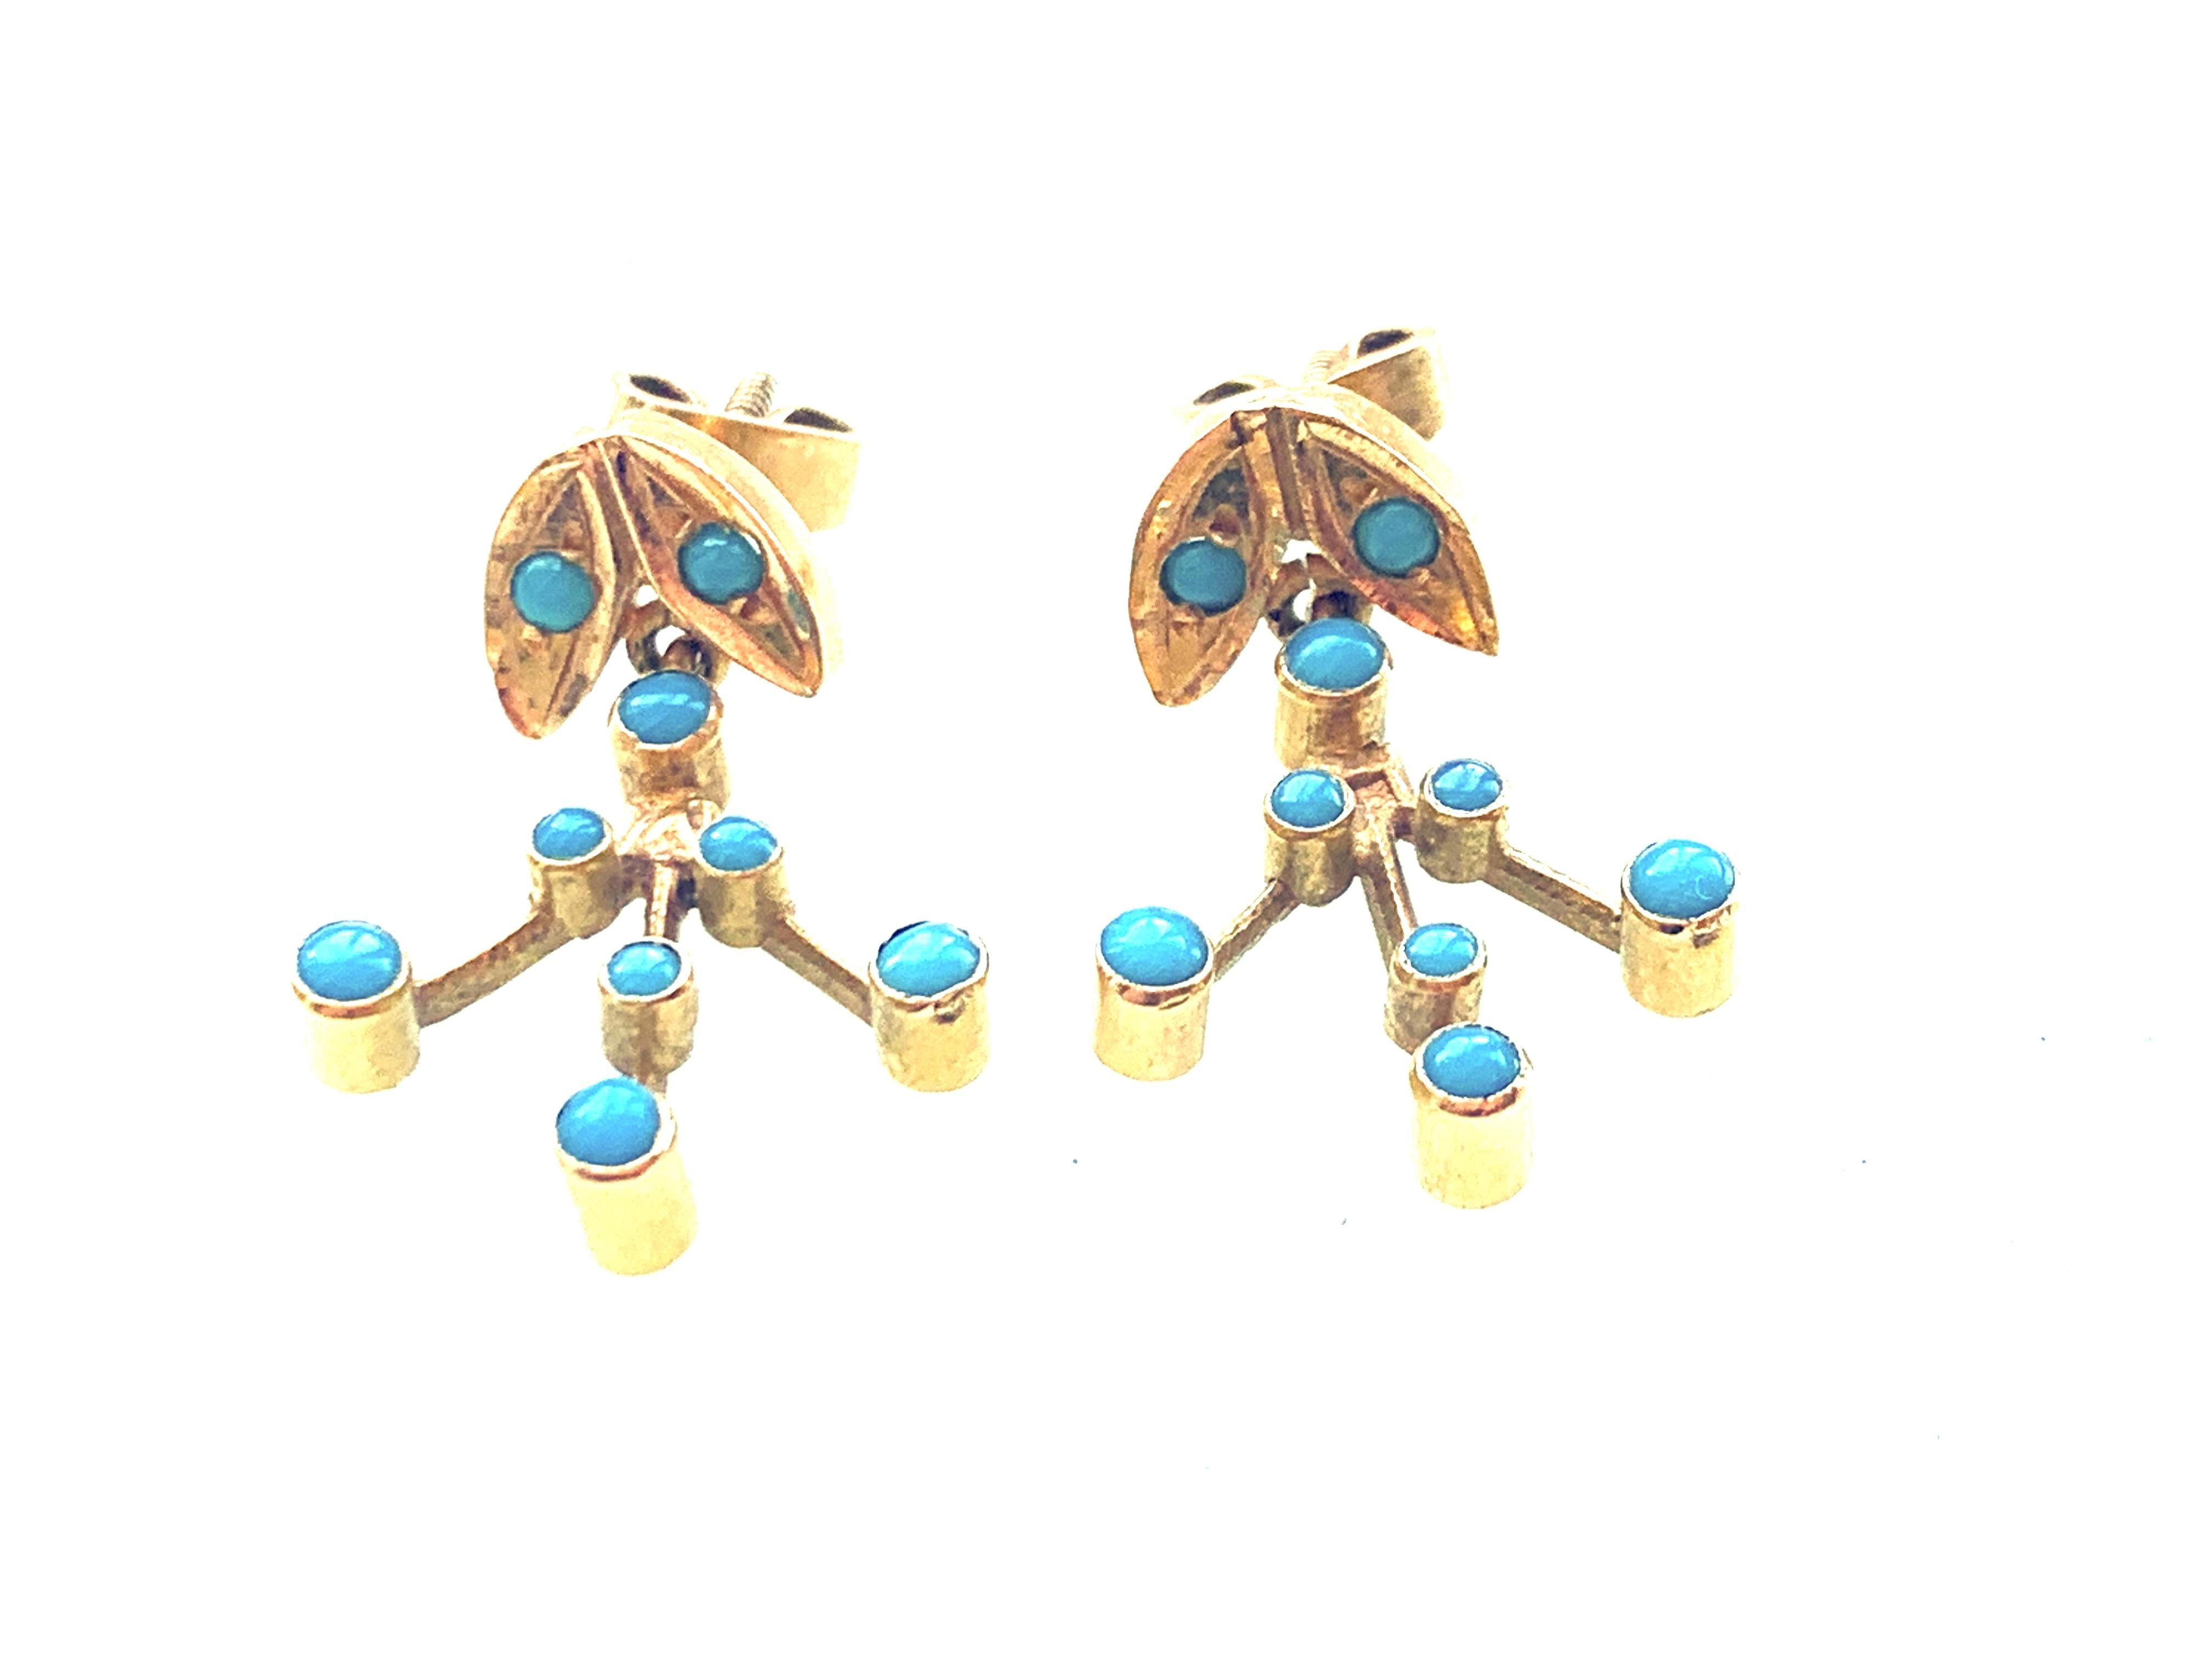 Beautiful 18ct Gold - turquoise set Earrings
stamped with Egyptian marks IV for 18ct gold
Era 1930s
Screw stud posts
with Butterfly Back fasteners 
which are the earrings original backs.